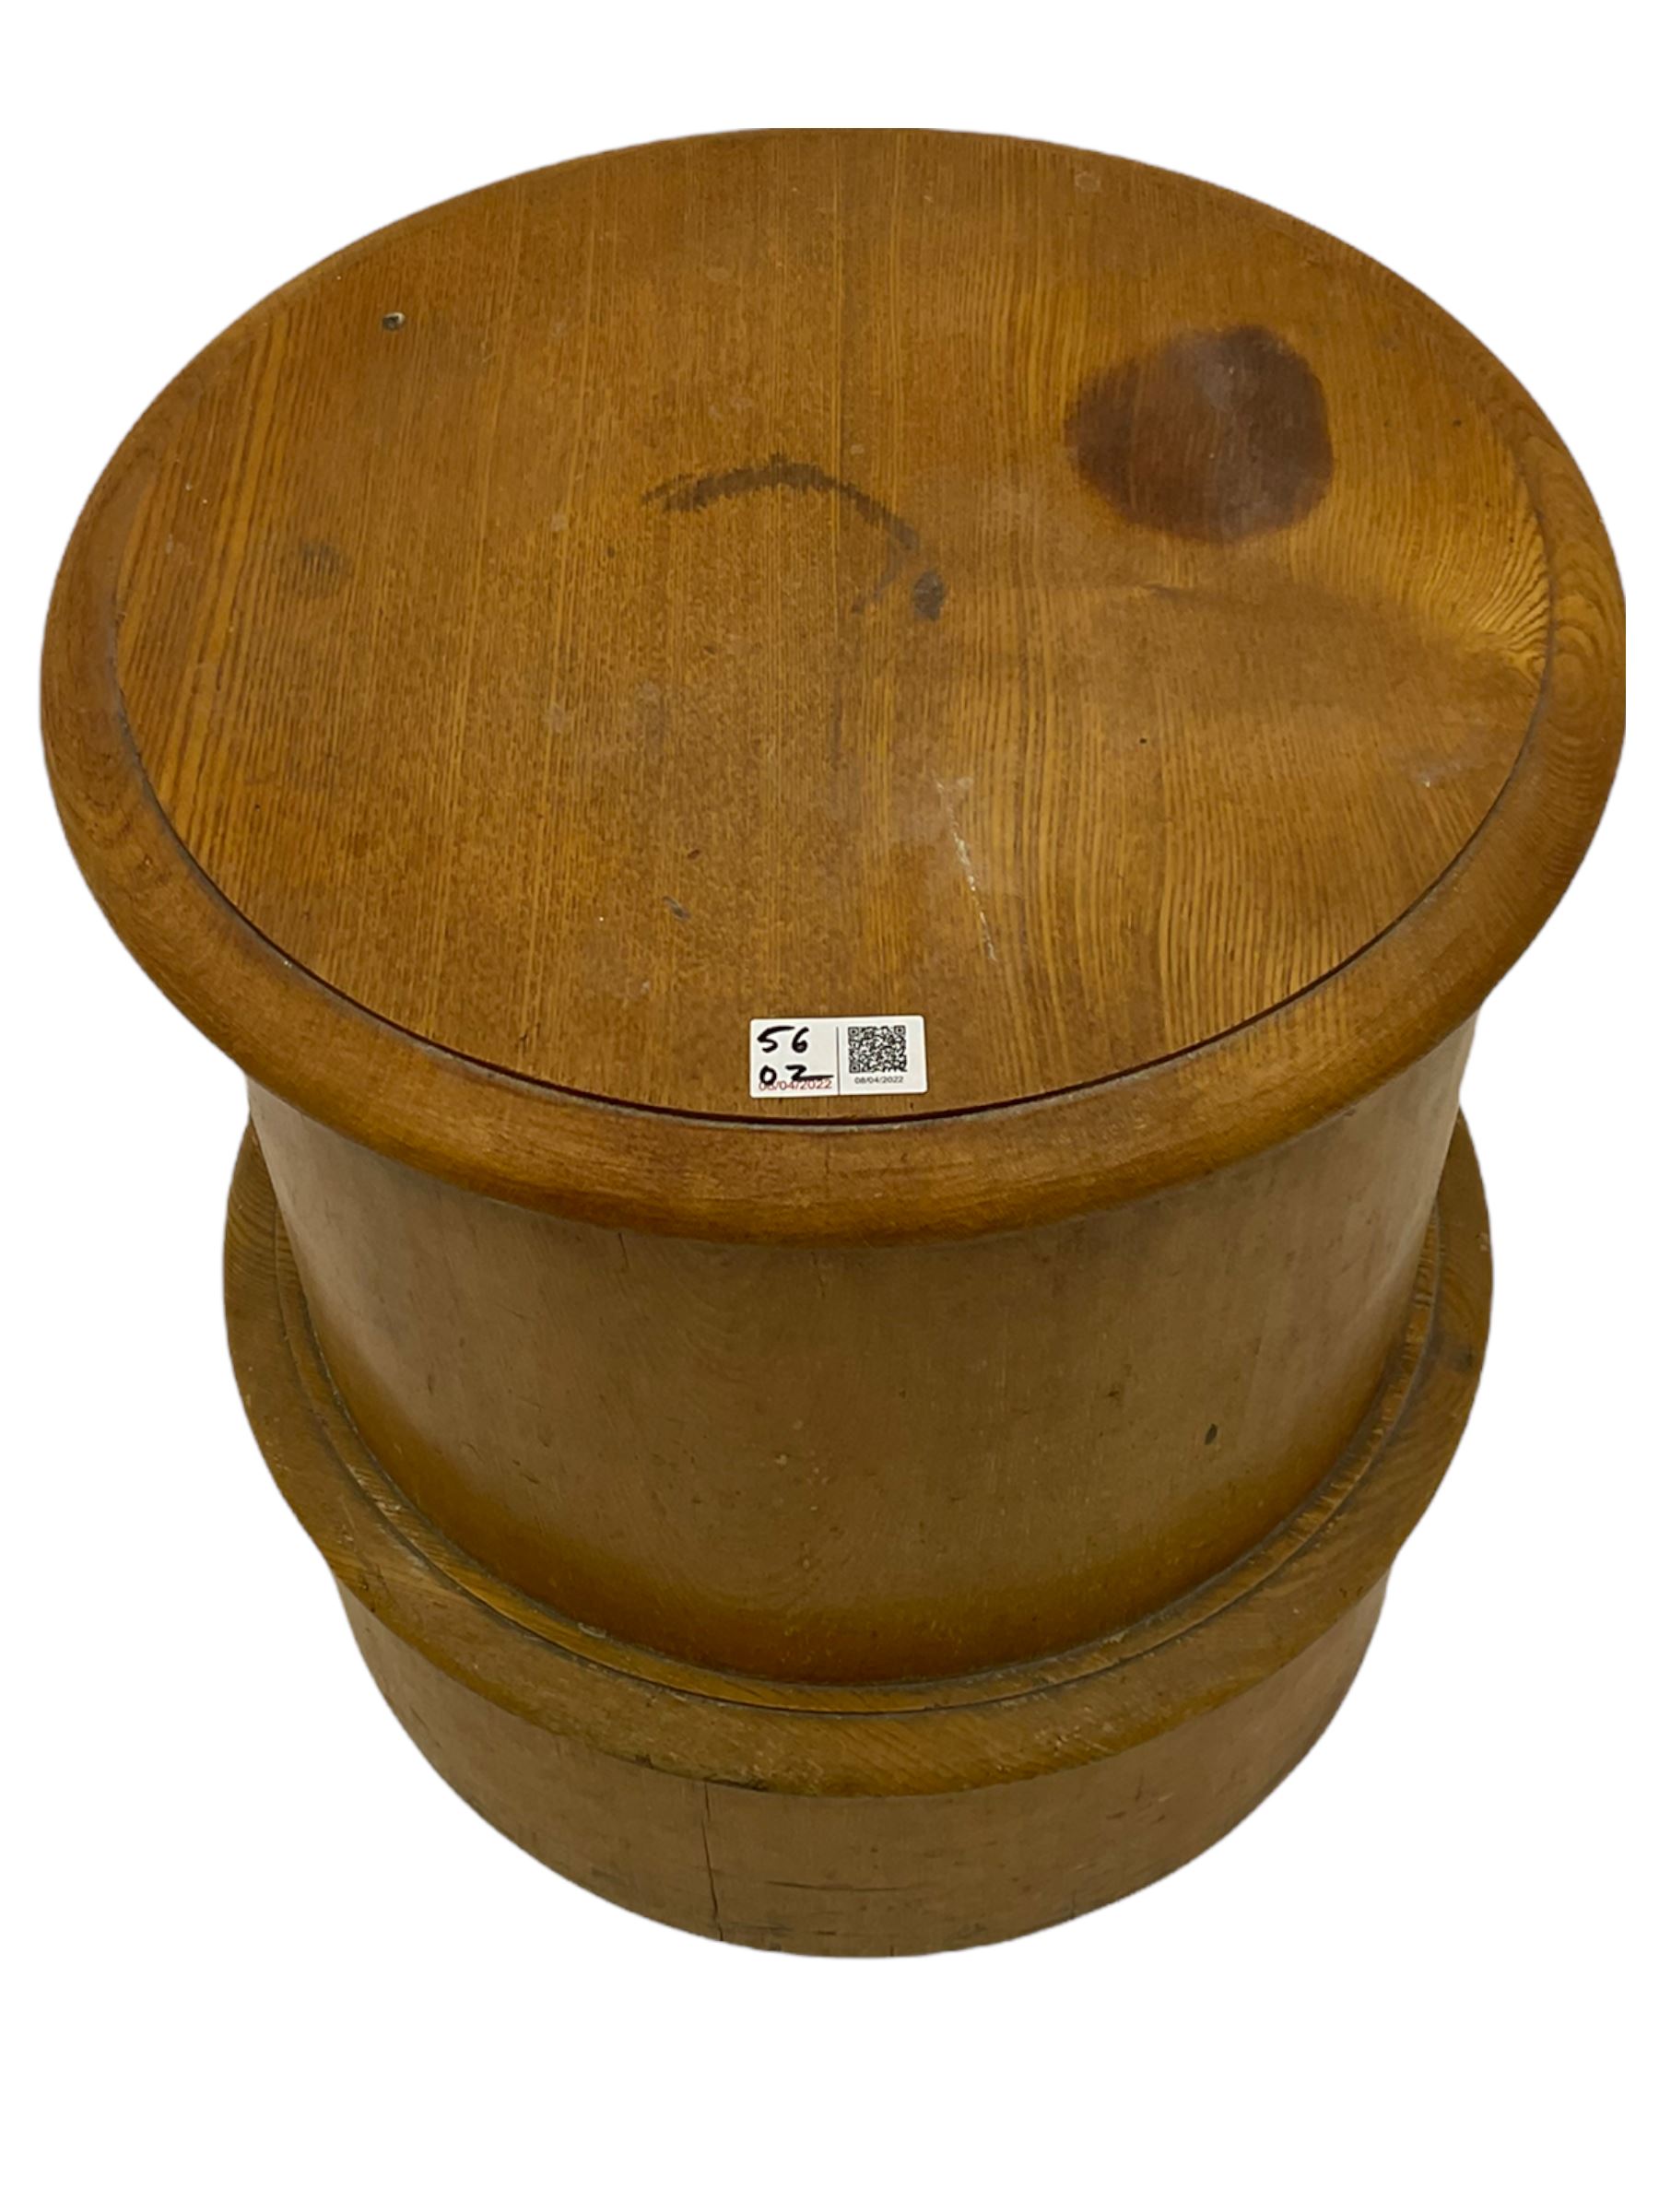 Late 19th century circular ash commode by "Jas Shoolbred" (D42cm) - Image 7 of 11